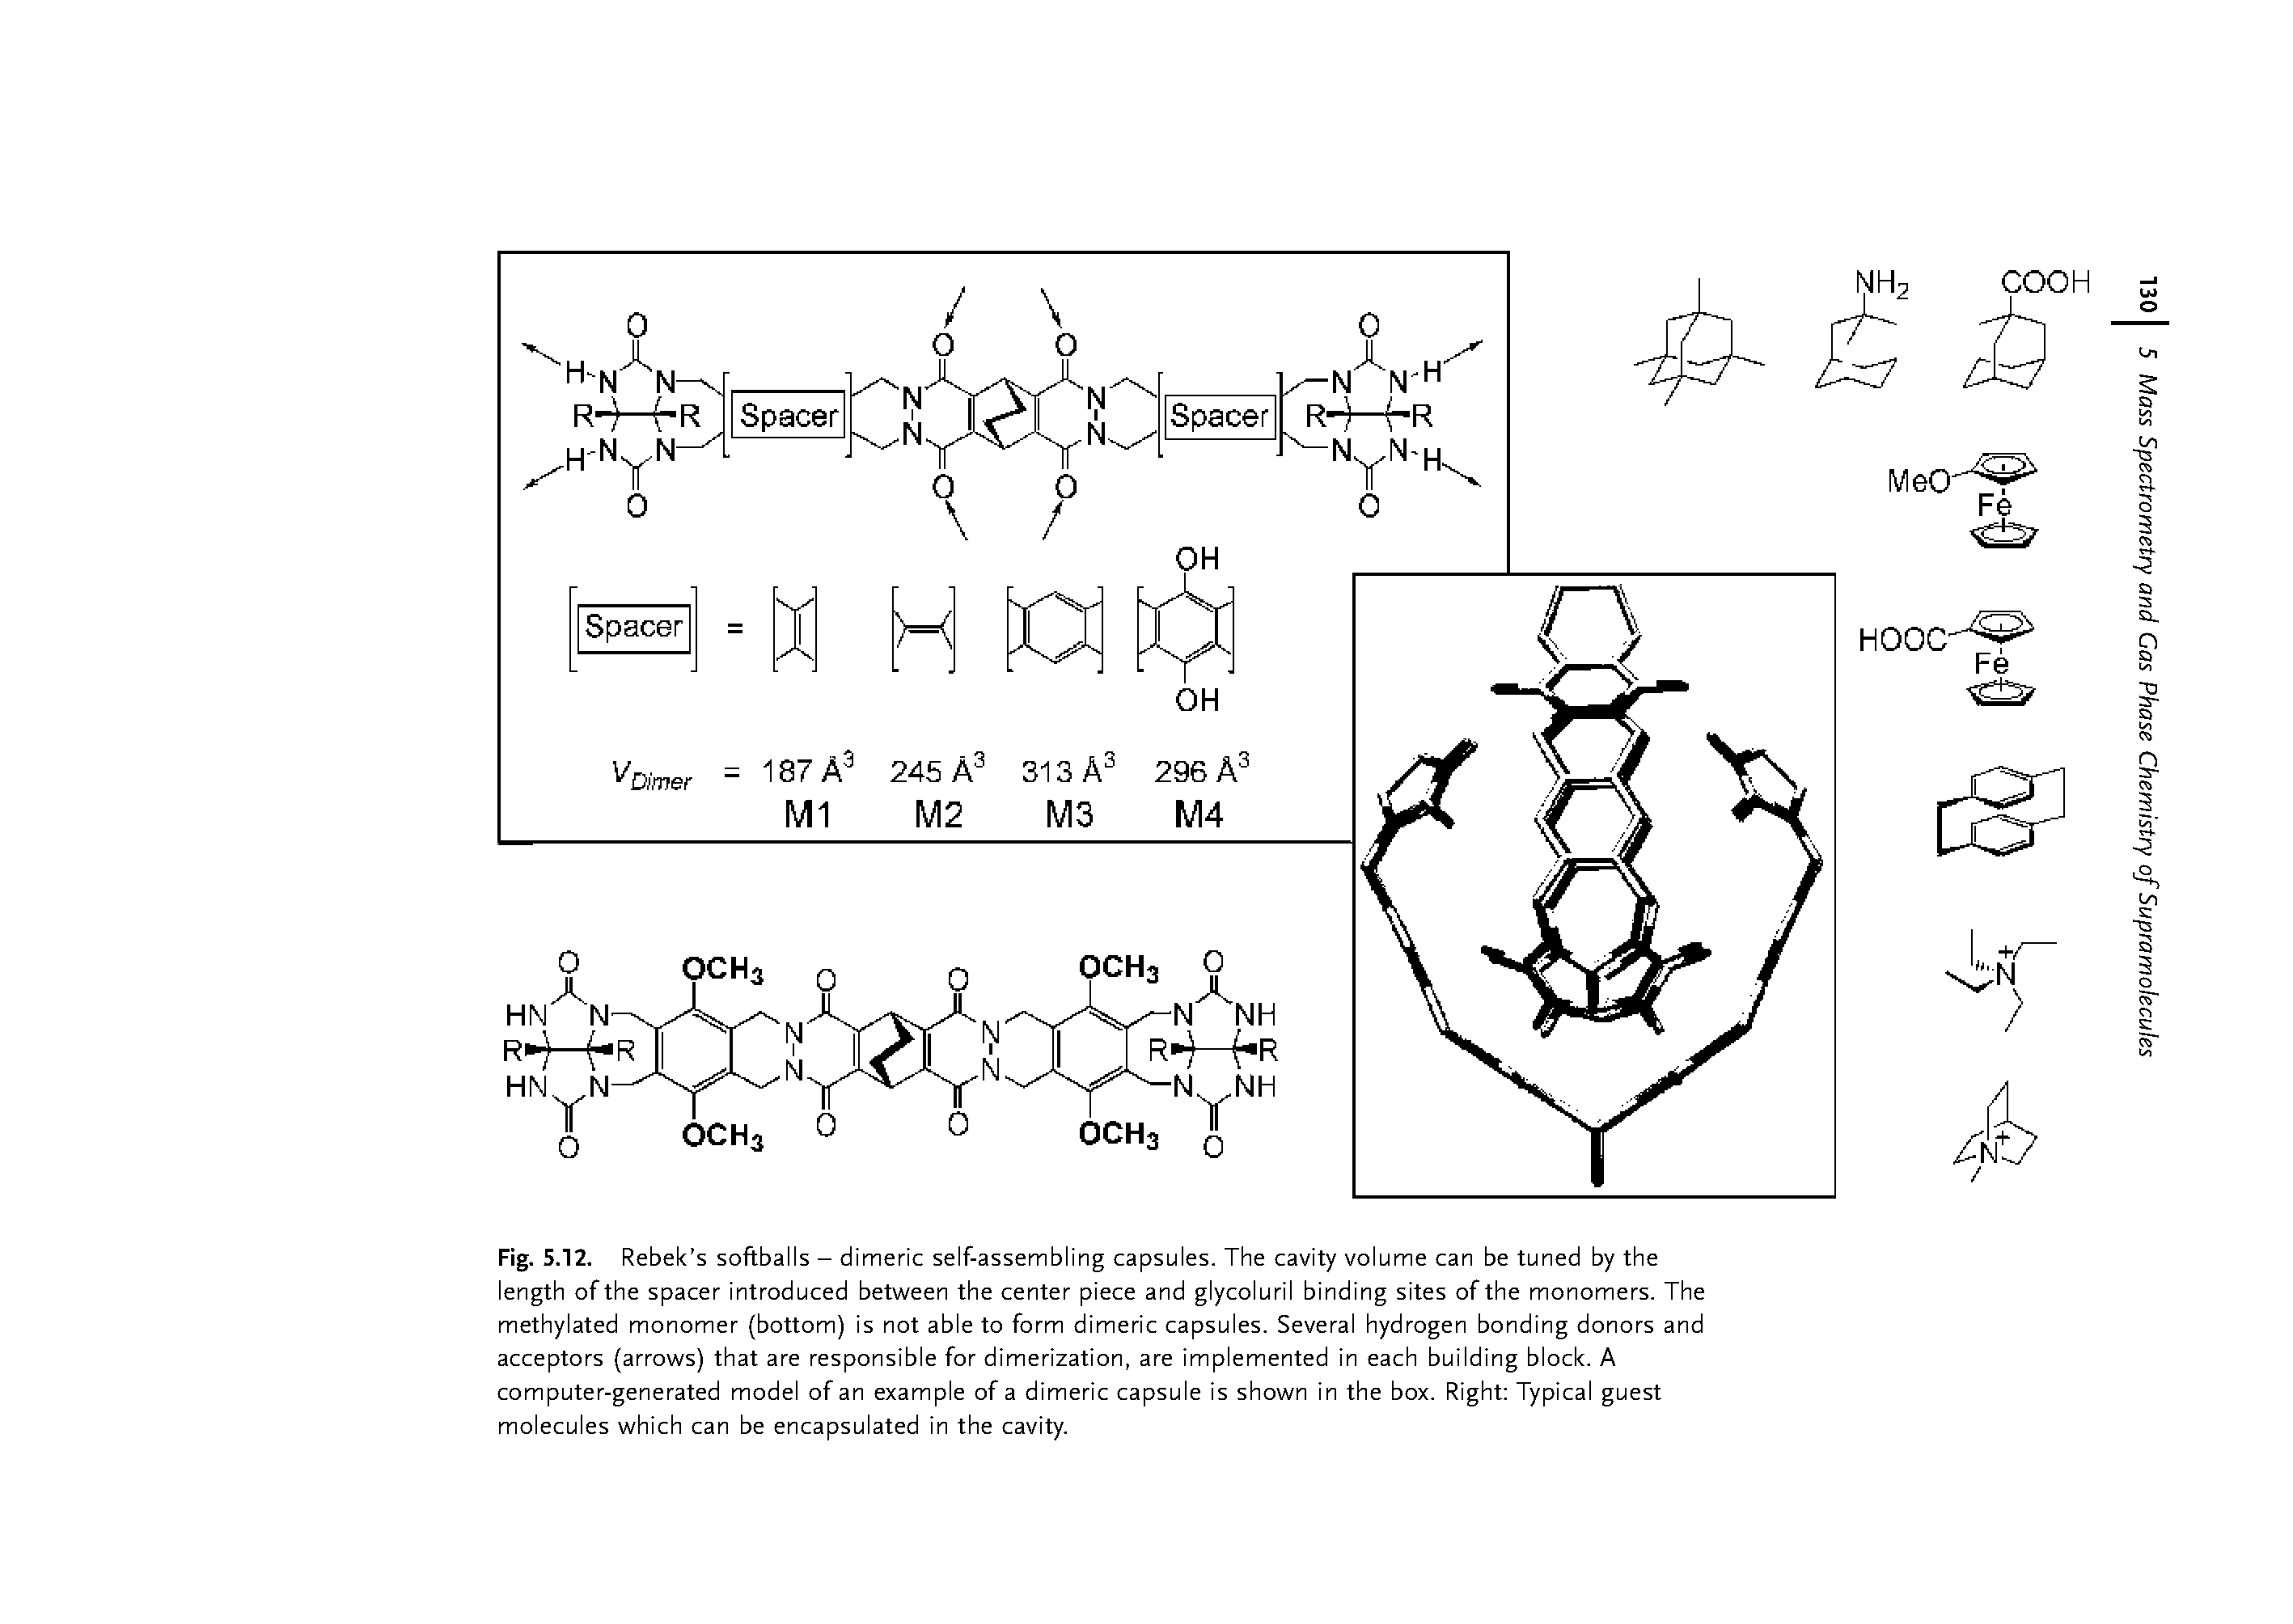 Fig. 5.12. Rebek s softballs — dimeric self-assembling capsules. The cavity volume can be tuned by the length of the spacer introduced between the center piece and glycoluril binding sites of the monomers. The methylated monomer (bottom) is not able to form dimeric capsules. Several hydrogen bonding donors and acceptors (arrows) that are responsible for dimerization, are implemented in each building block. A computer-generated model of an example of a dimeric capsule is shown in the box. Right Typical guest molecules which can be encapsulated in the cavity.